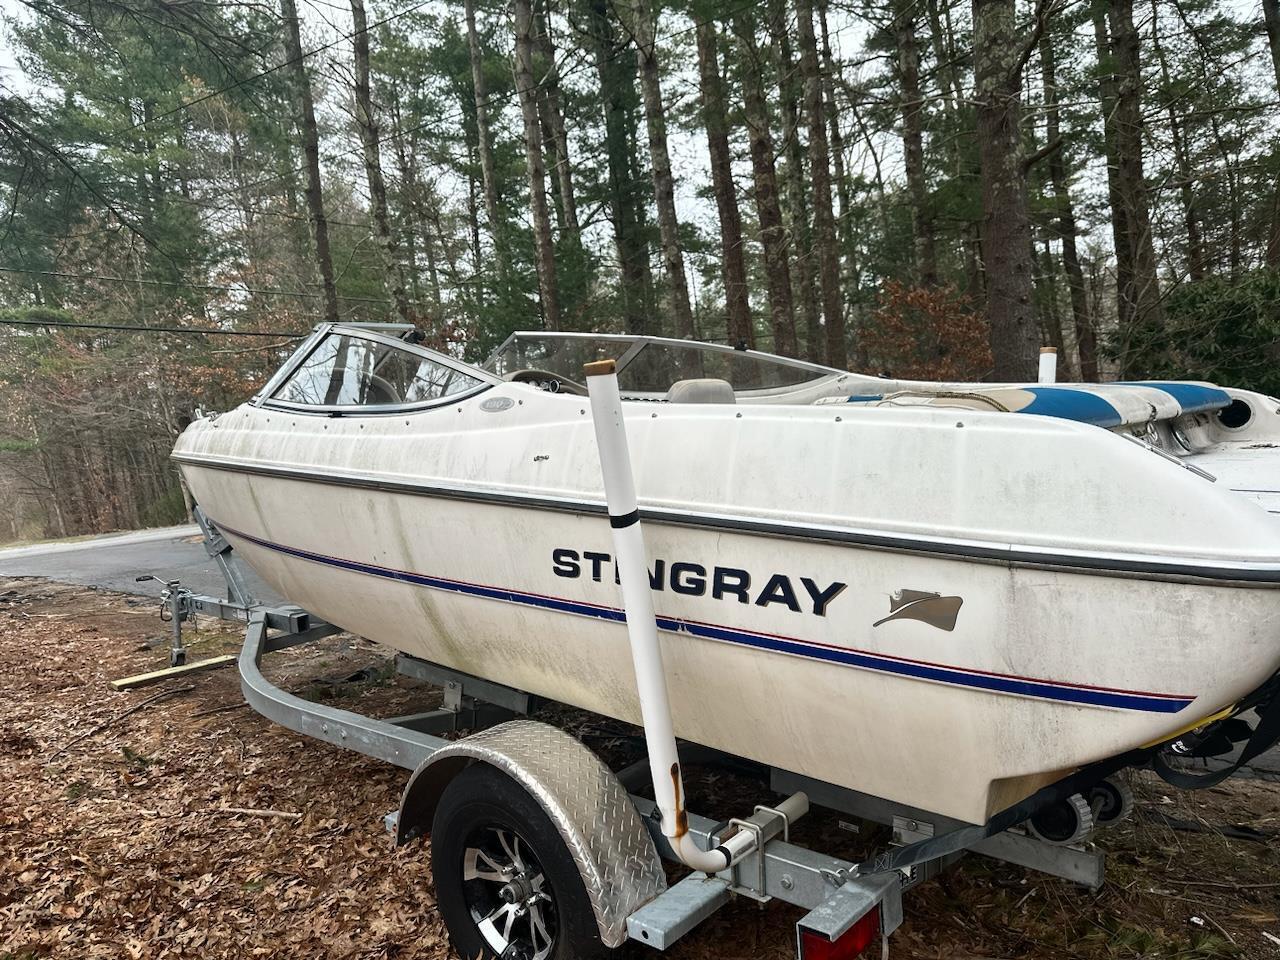 Owner 2004 Stingray 20' Boat Located in Easton, MA - No Trailer